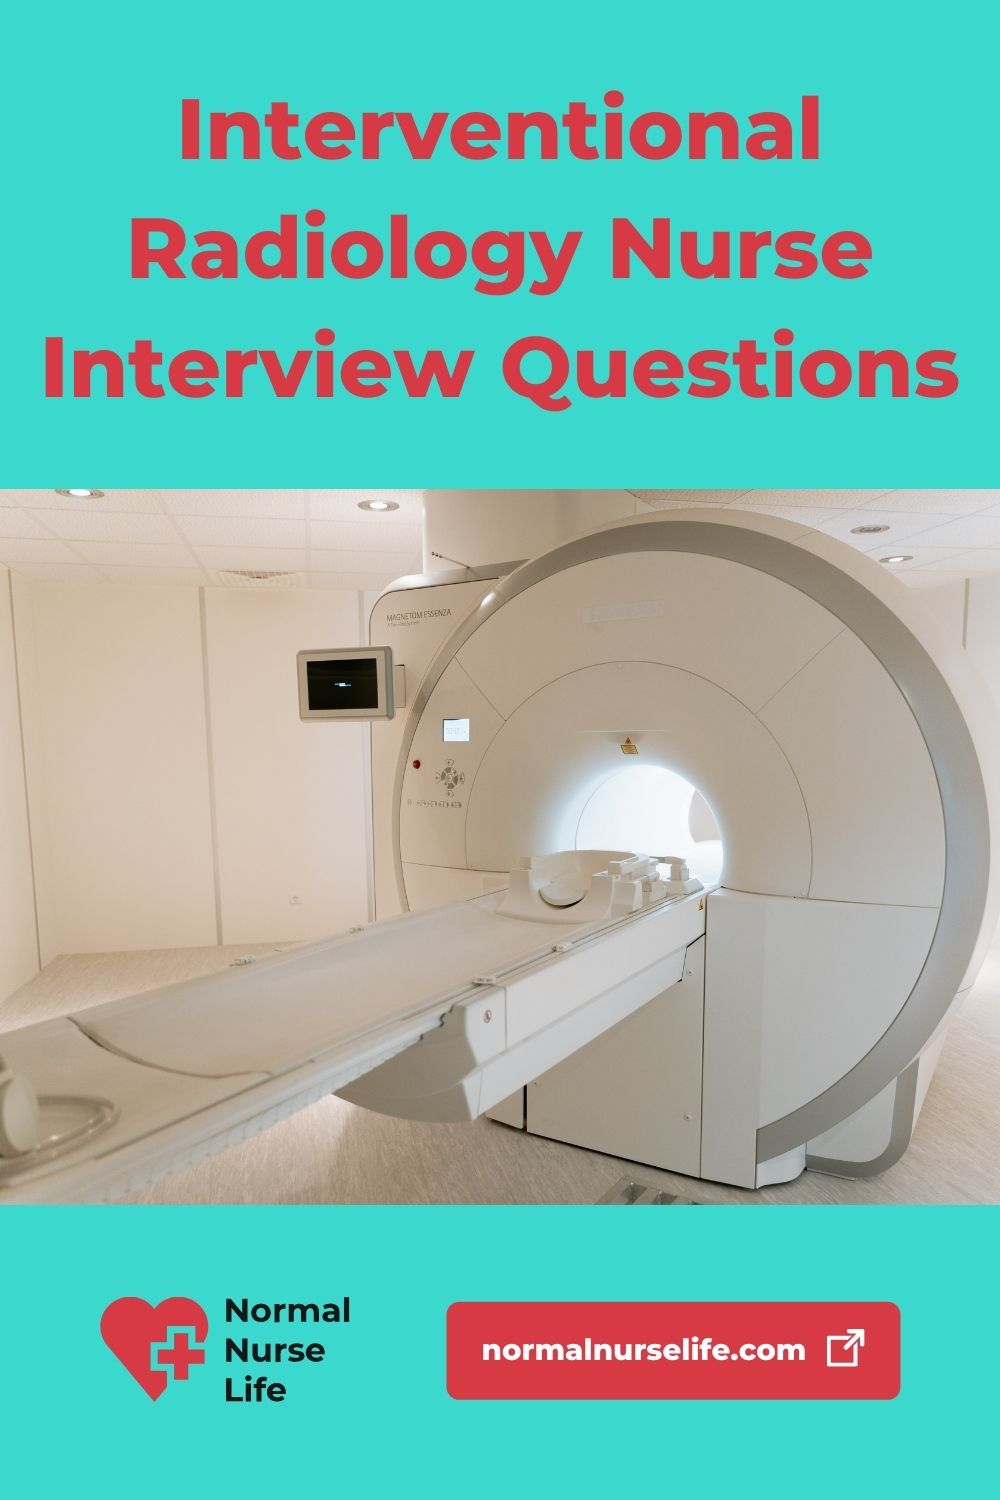 Interventional radiology nurse interview questions and answers